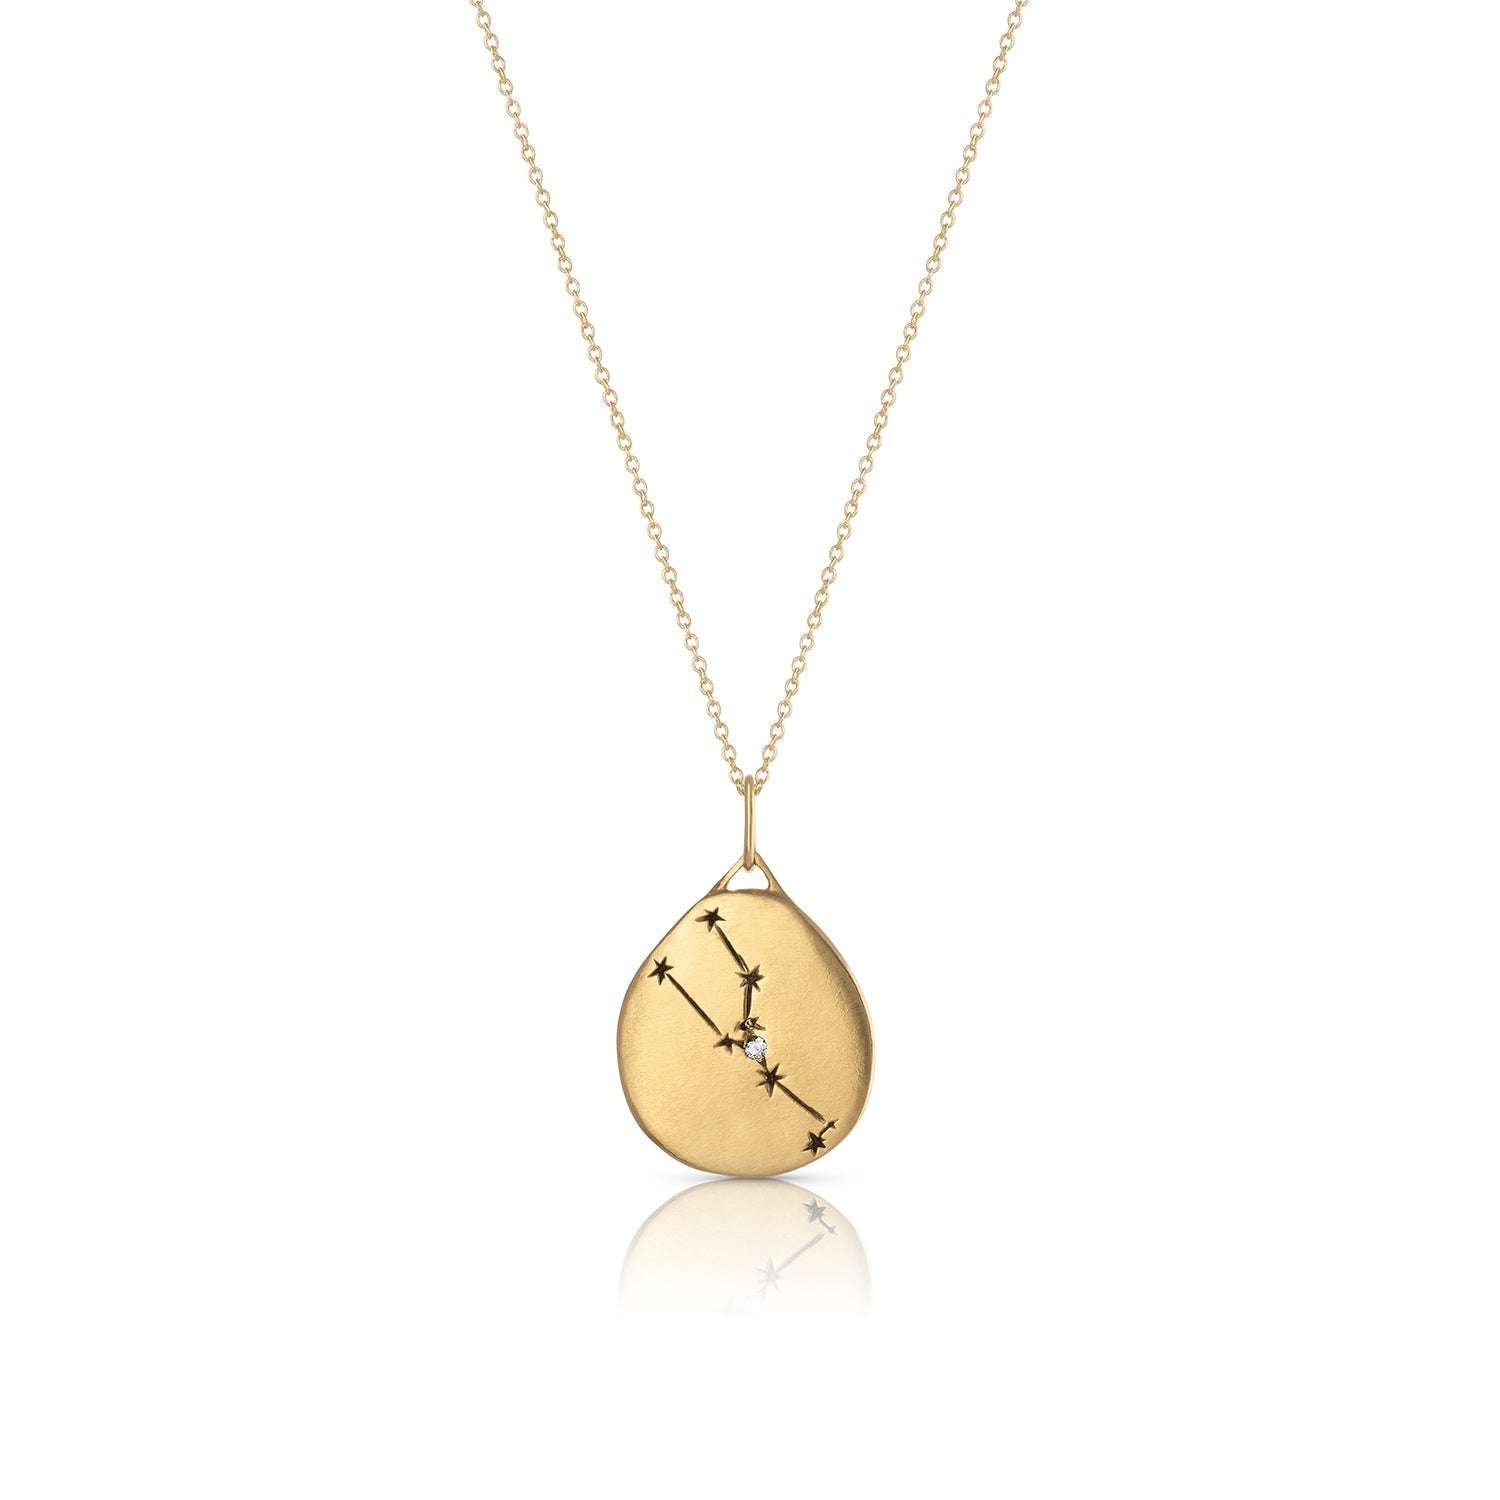 Taurus Celestial Zodiac Necklace | 12th HOUSE | Mystical Fine Jewelry | Gold constellation necklace | Fine zodiac necklace 14k gold constellation necklace Constellation necklace Taurus constellation necklace Gold Taurus constellation necklace |